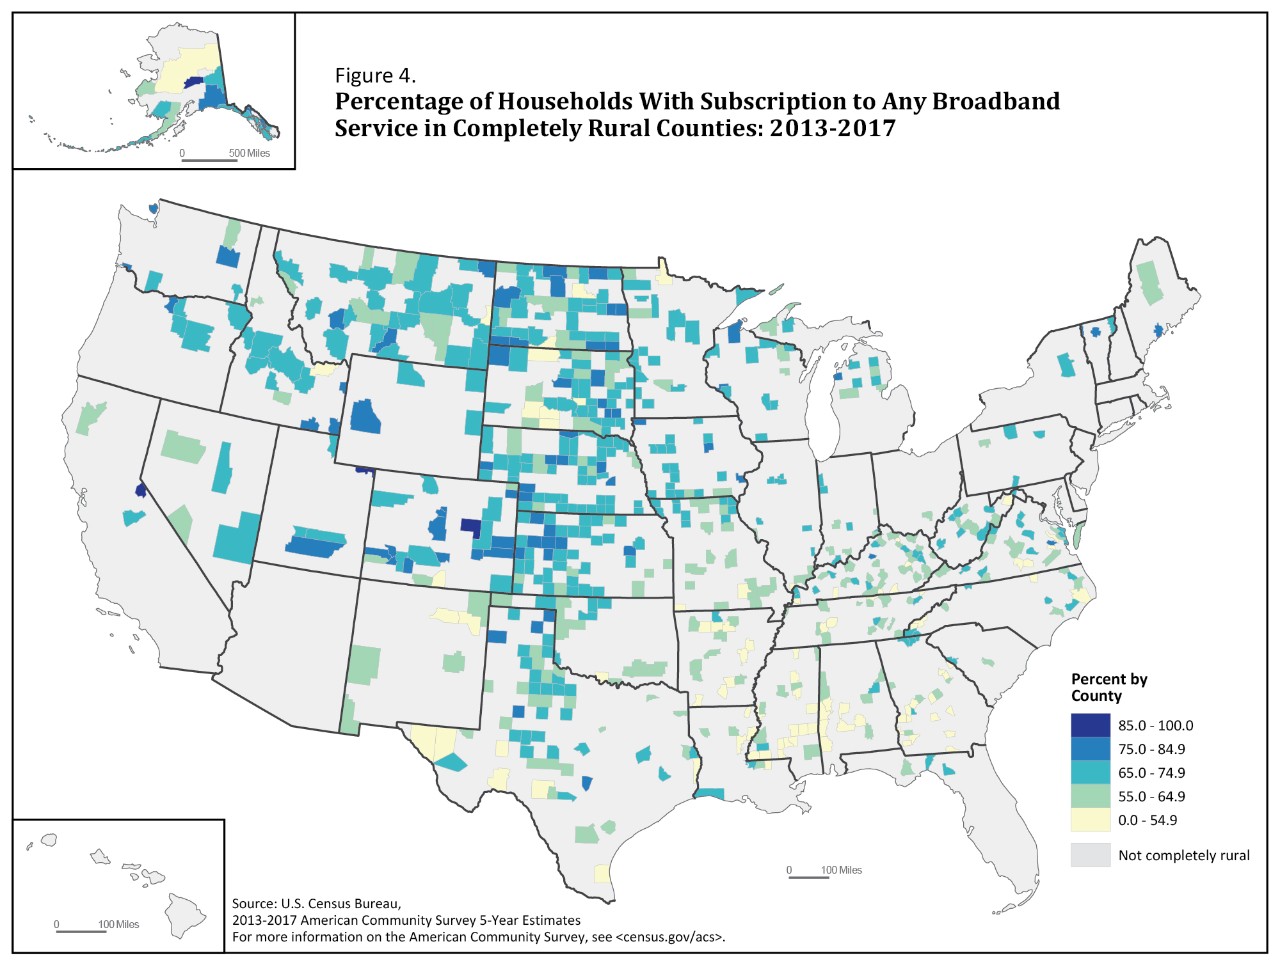 Figure 4. Percentage of Households With Subscription to Any Broadband Service in Completely Rural Counties: 2013-2017